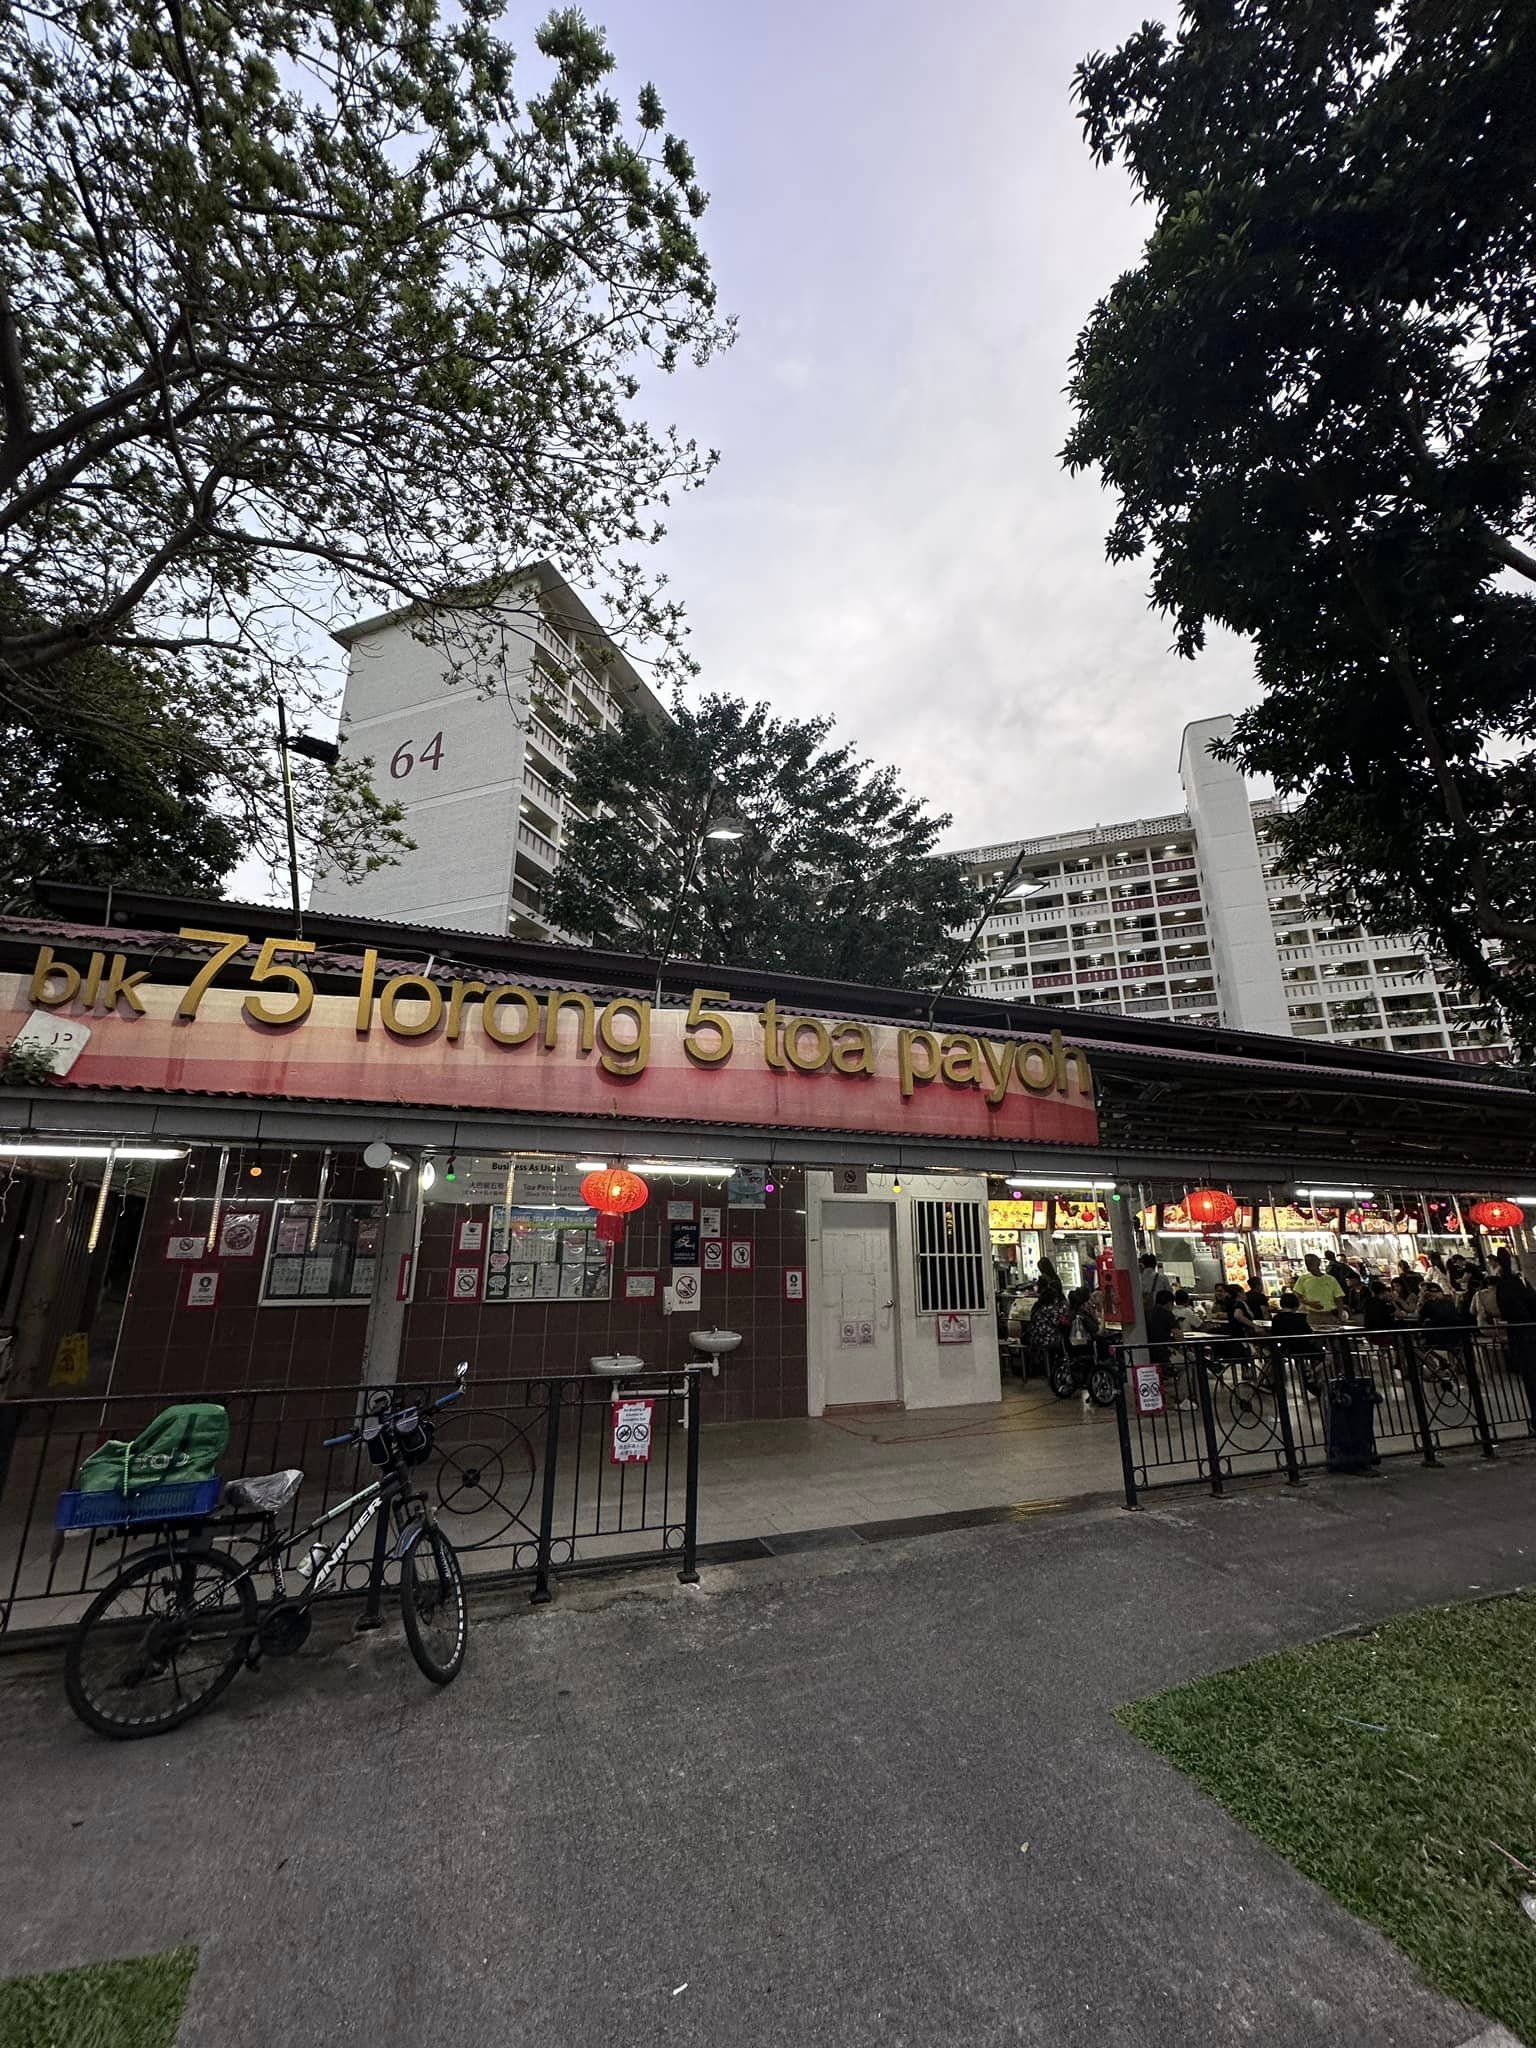 Famous hawker Ah Pui Satay reopens in Toa Payoh after 2-year hiatus, sells S$1 satay sticks